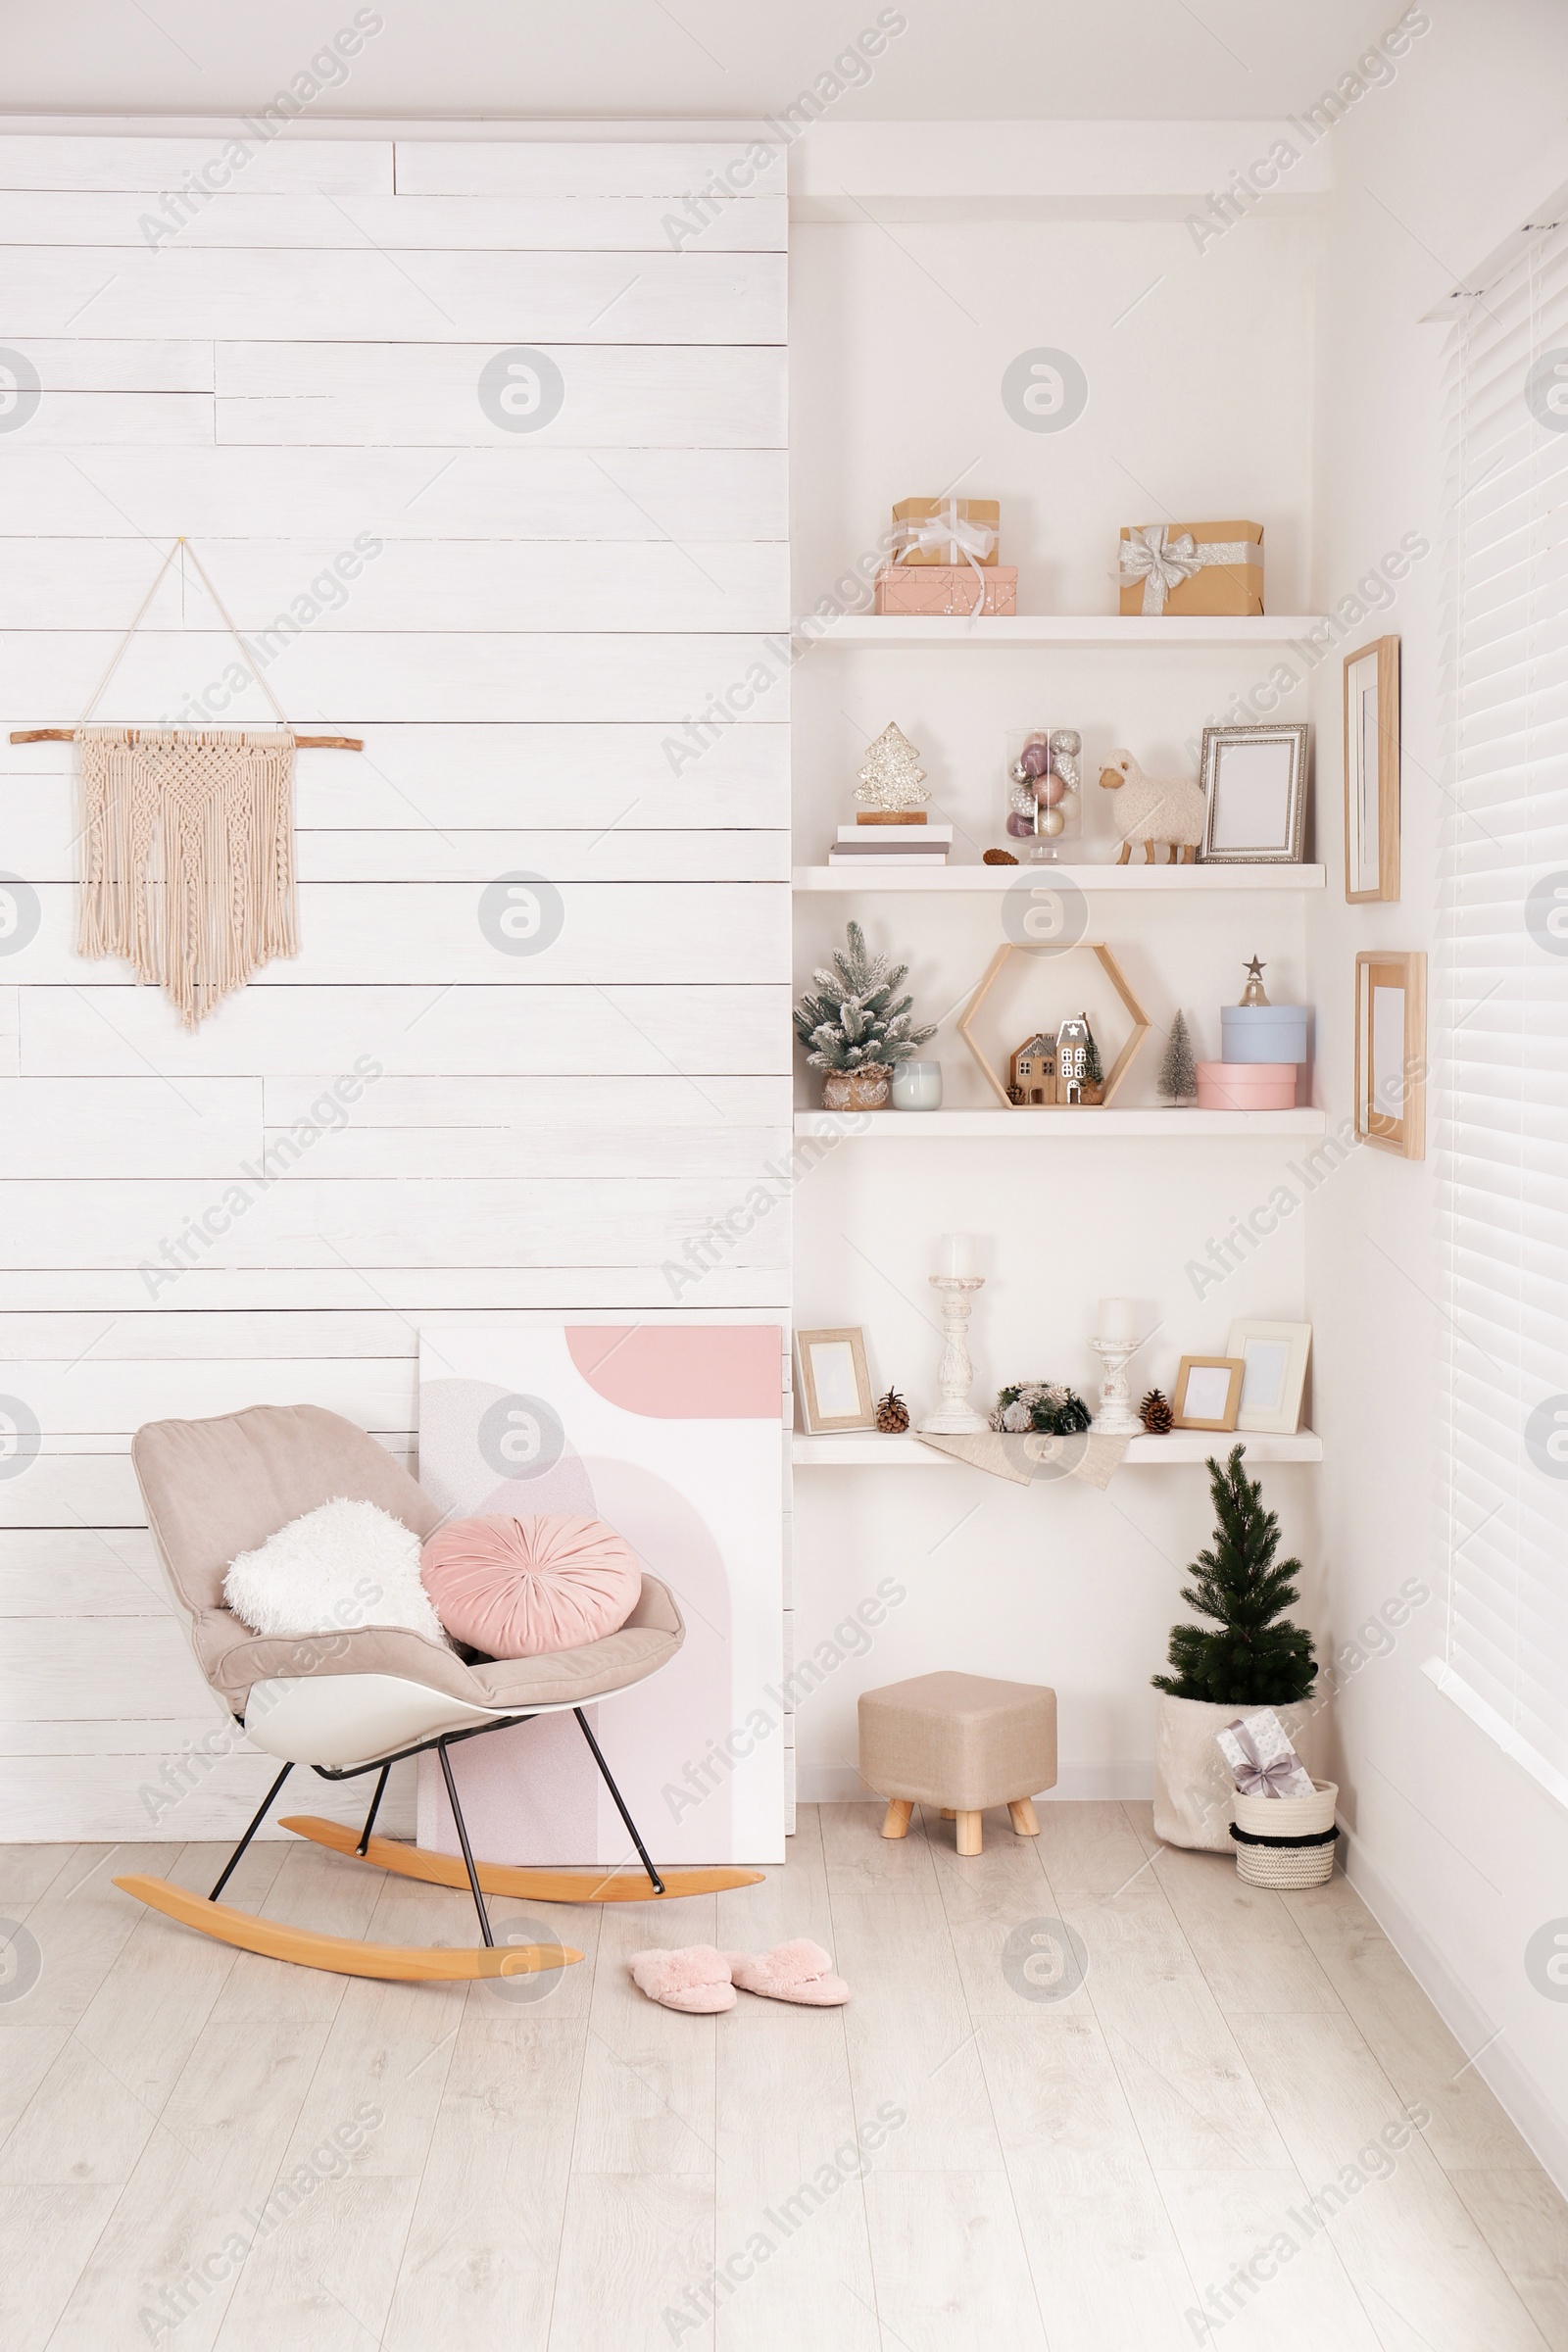 Photo of Stylish room interior with rocking chair, wall shelves and beautiful Christmas decor